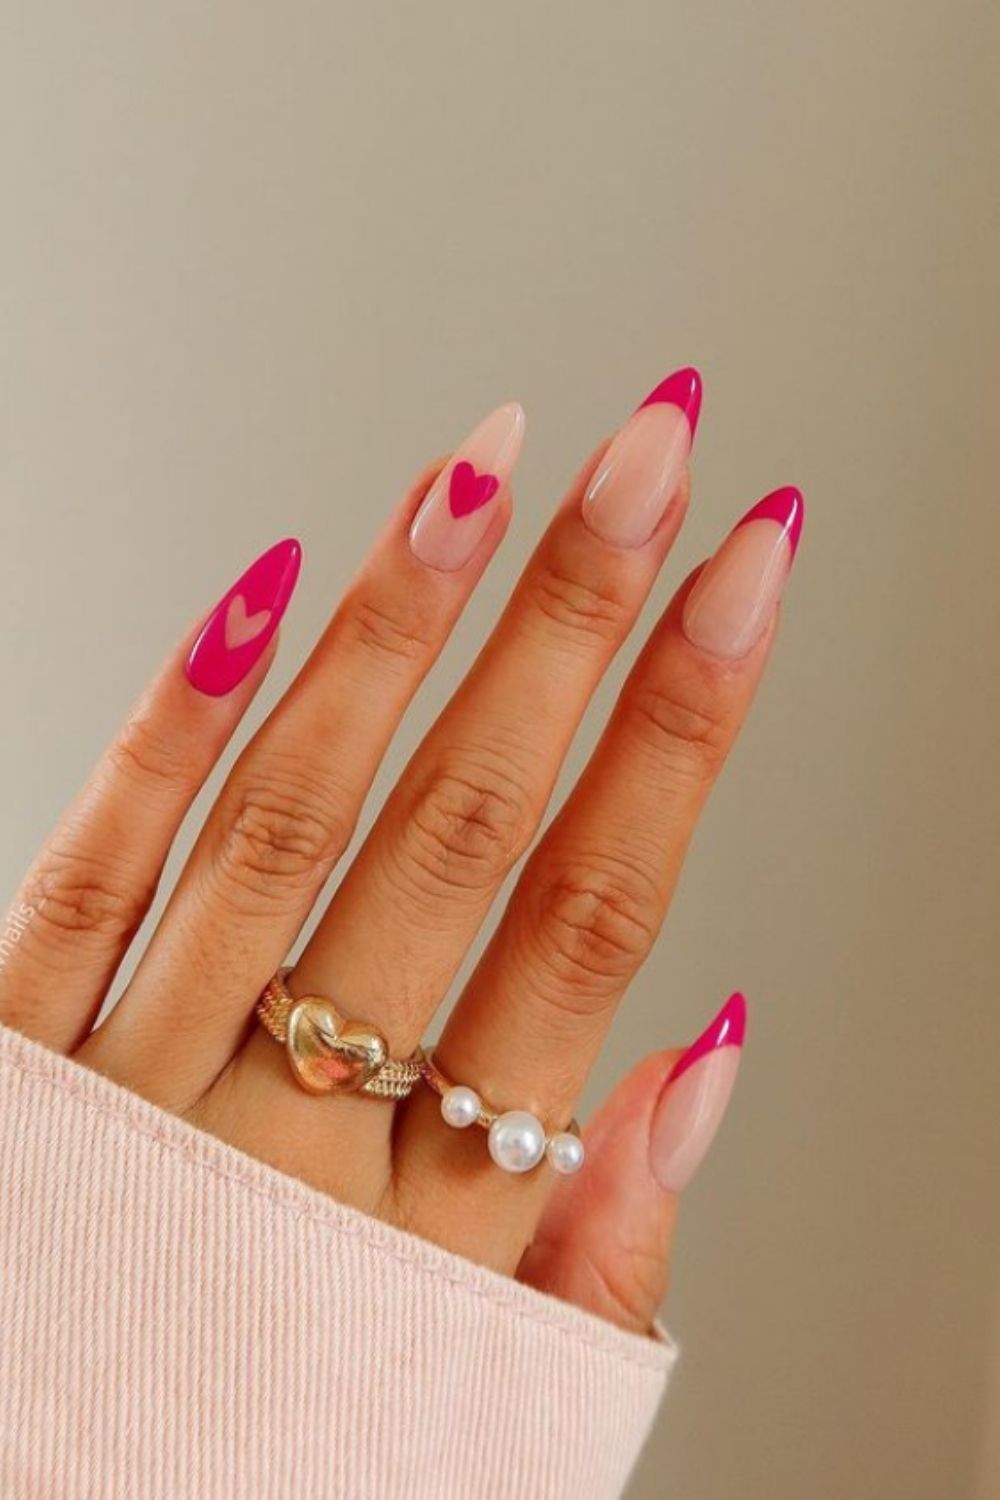 Red and pink almond nail art with heart